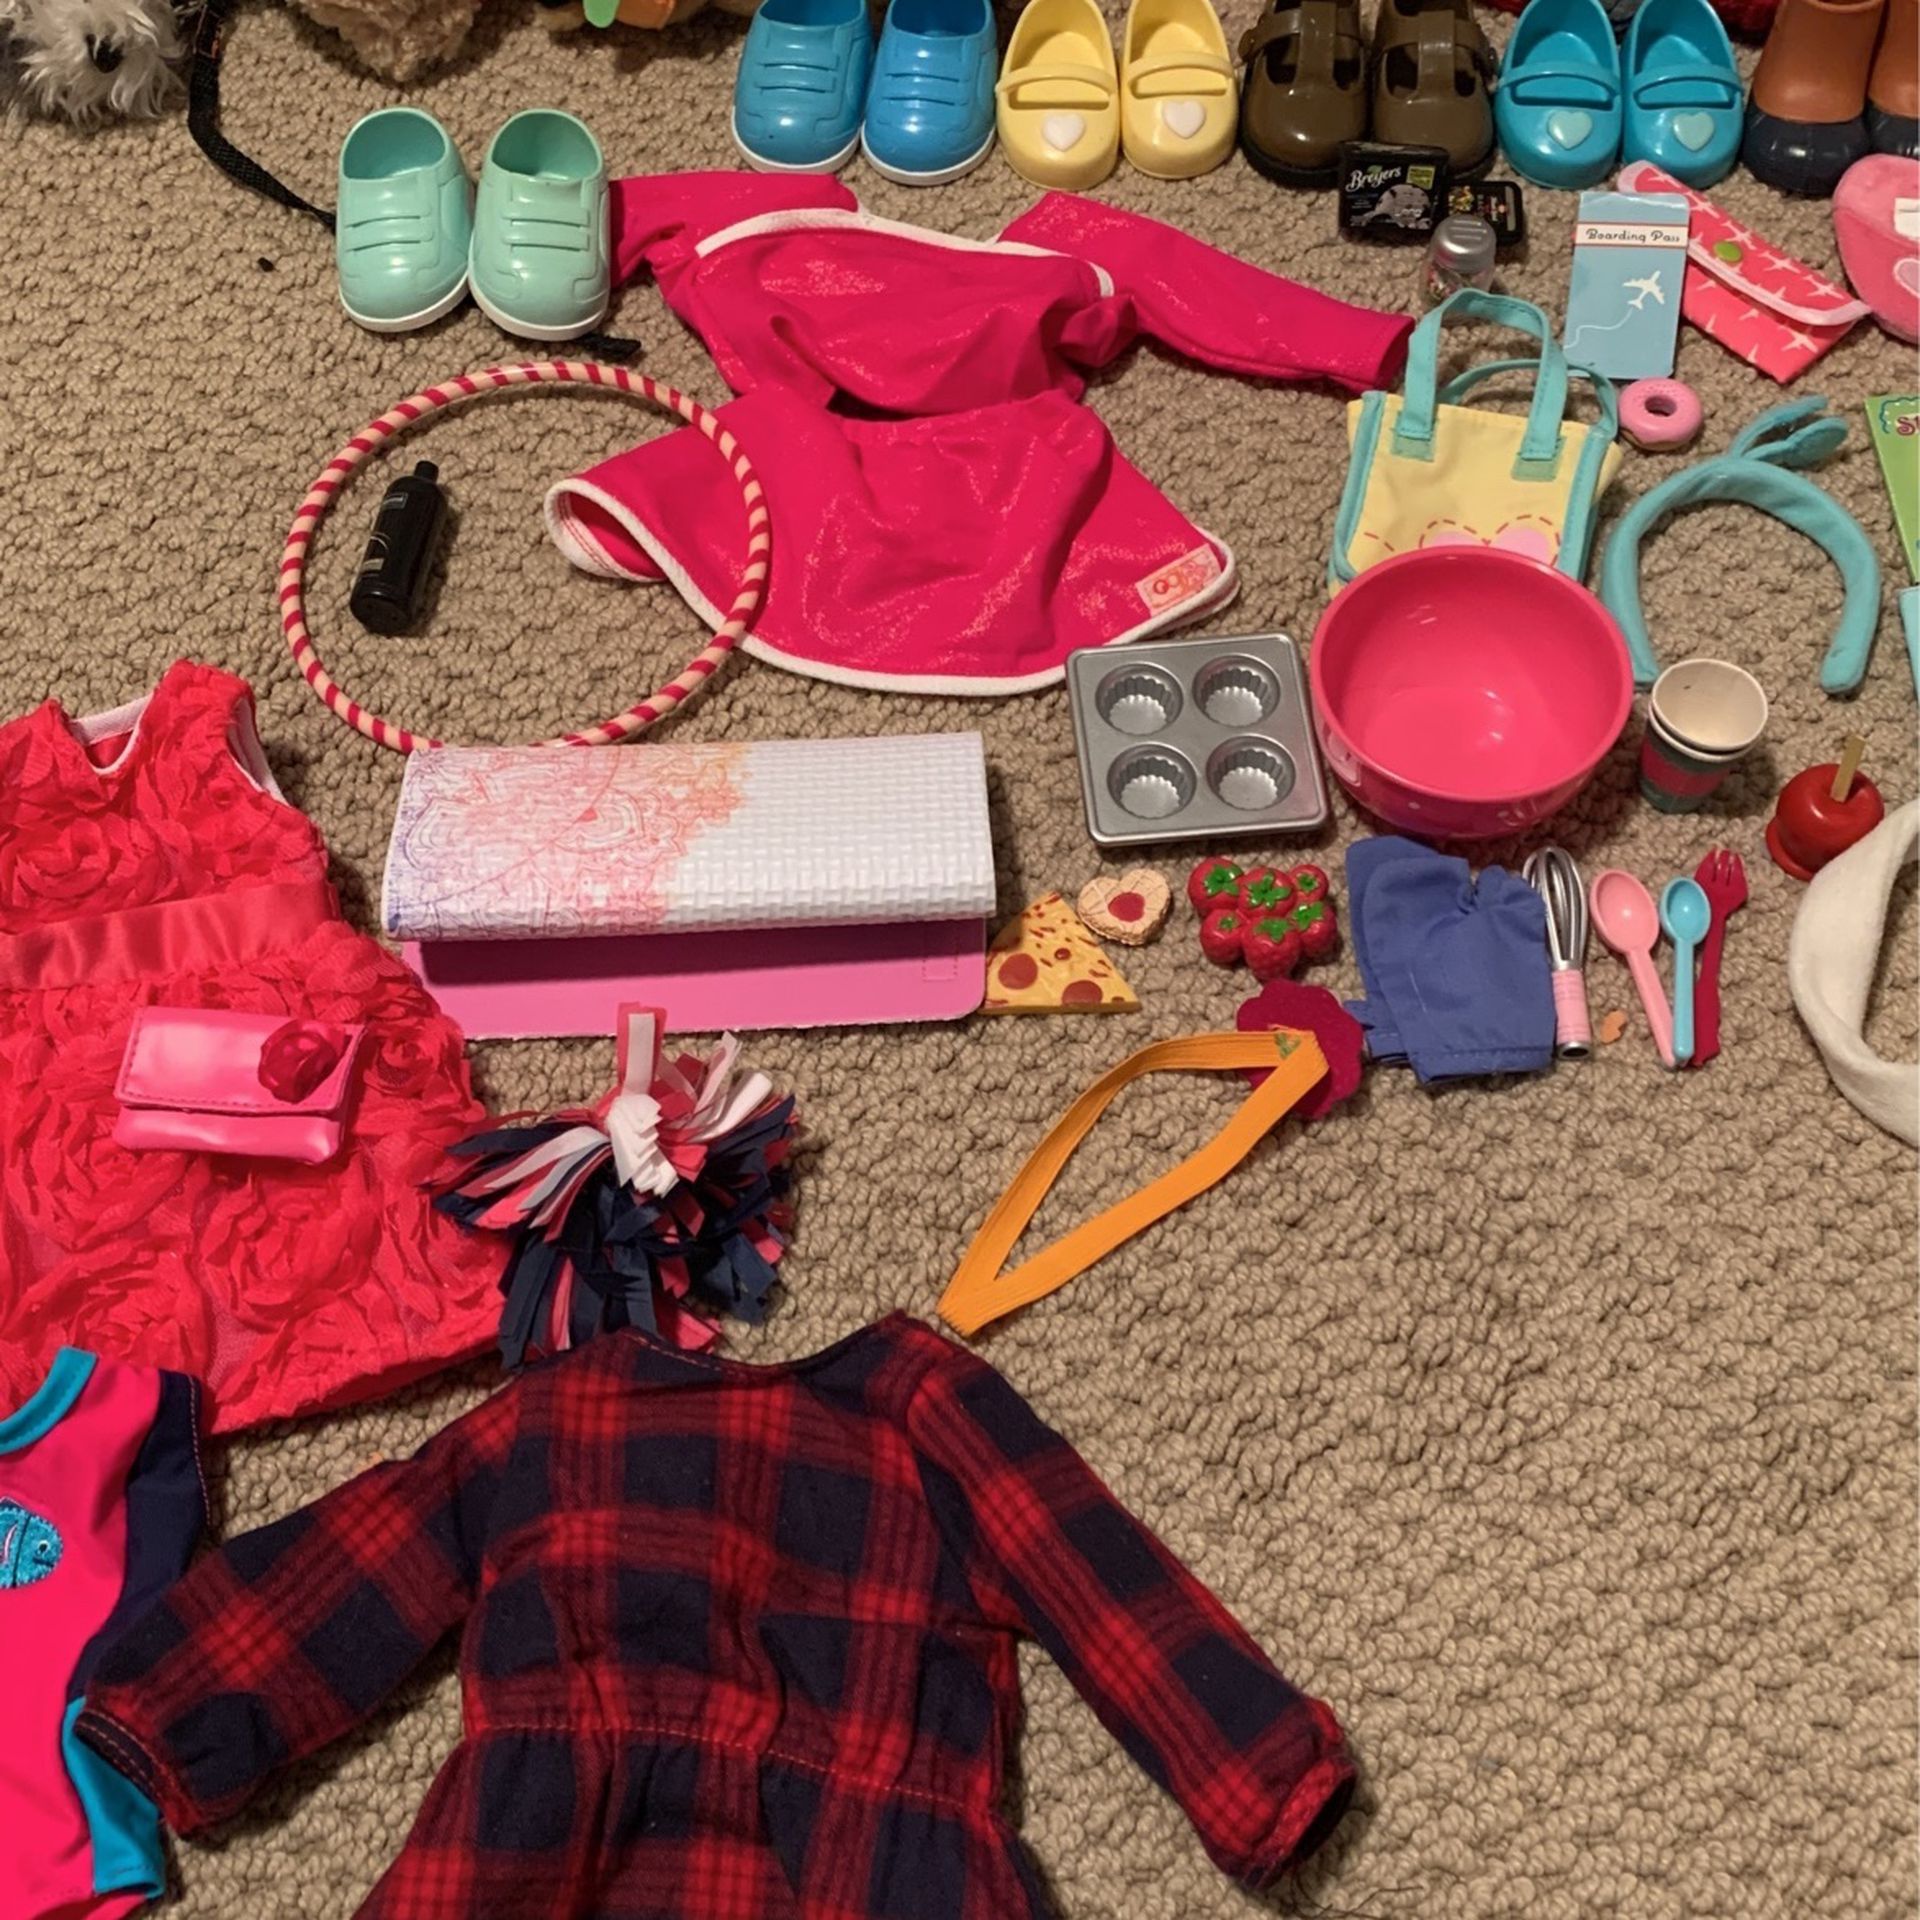 Huge Lot Of Our Generation Doll Pets Amd Accessories . Fits American Girl Doll